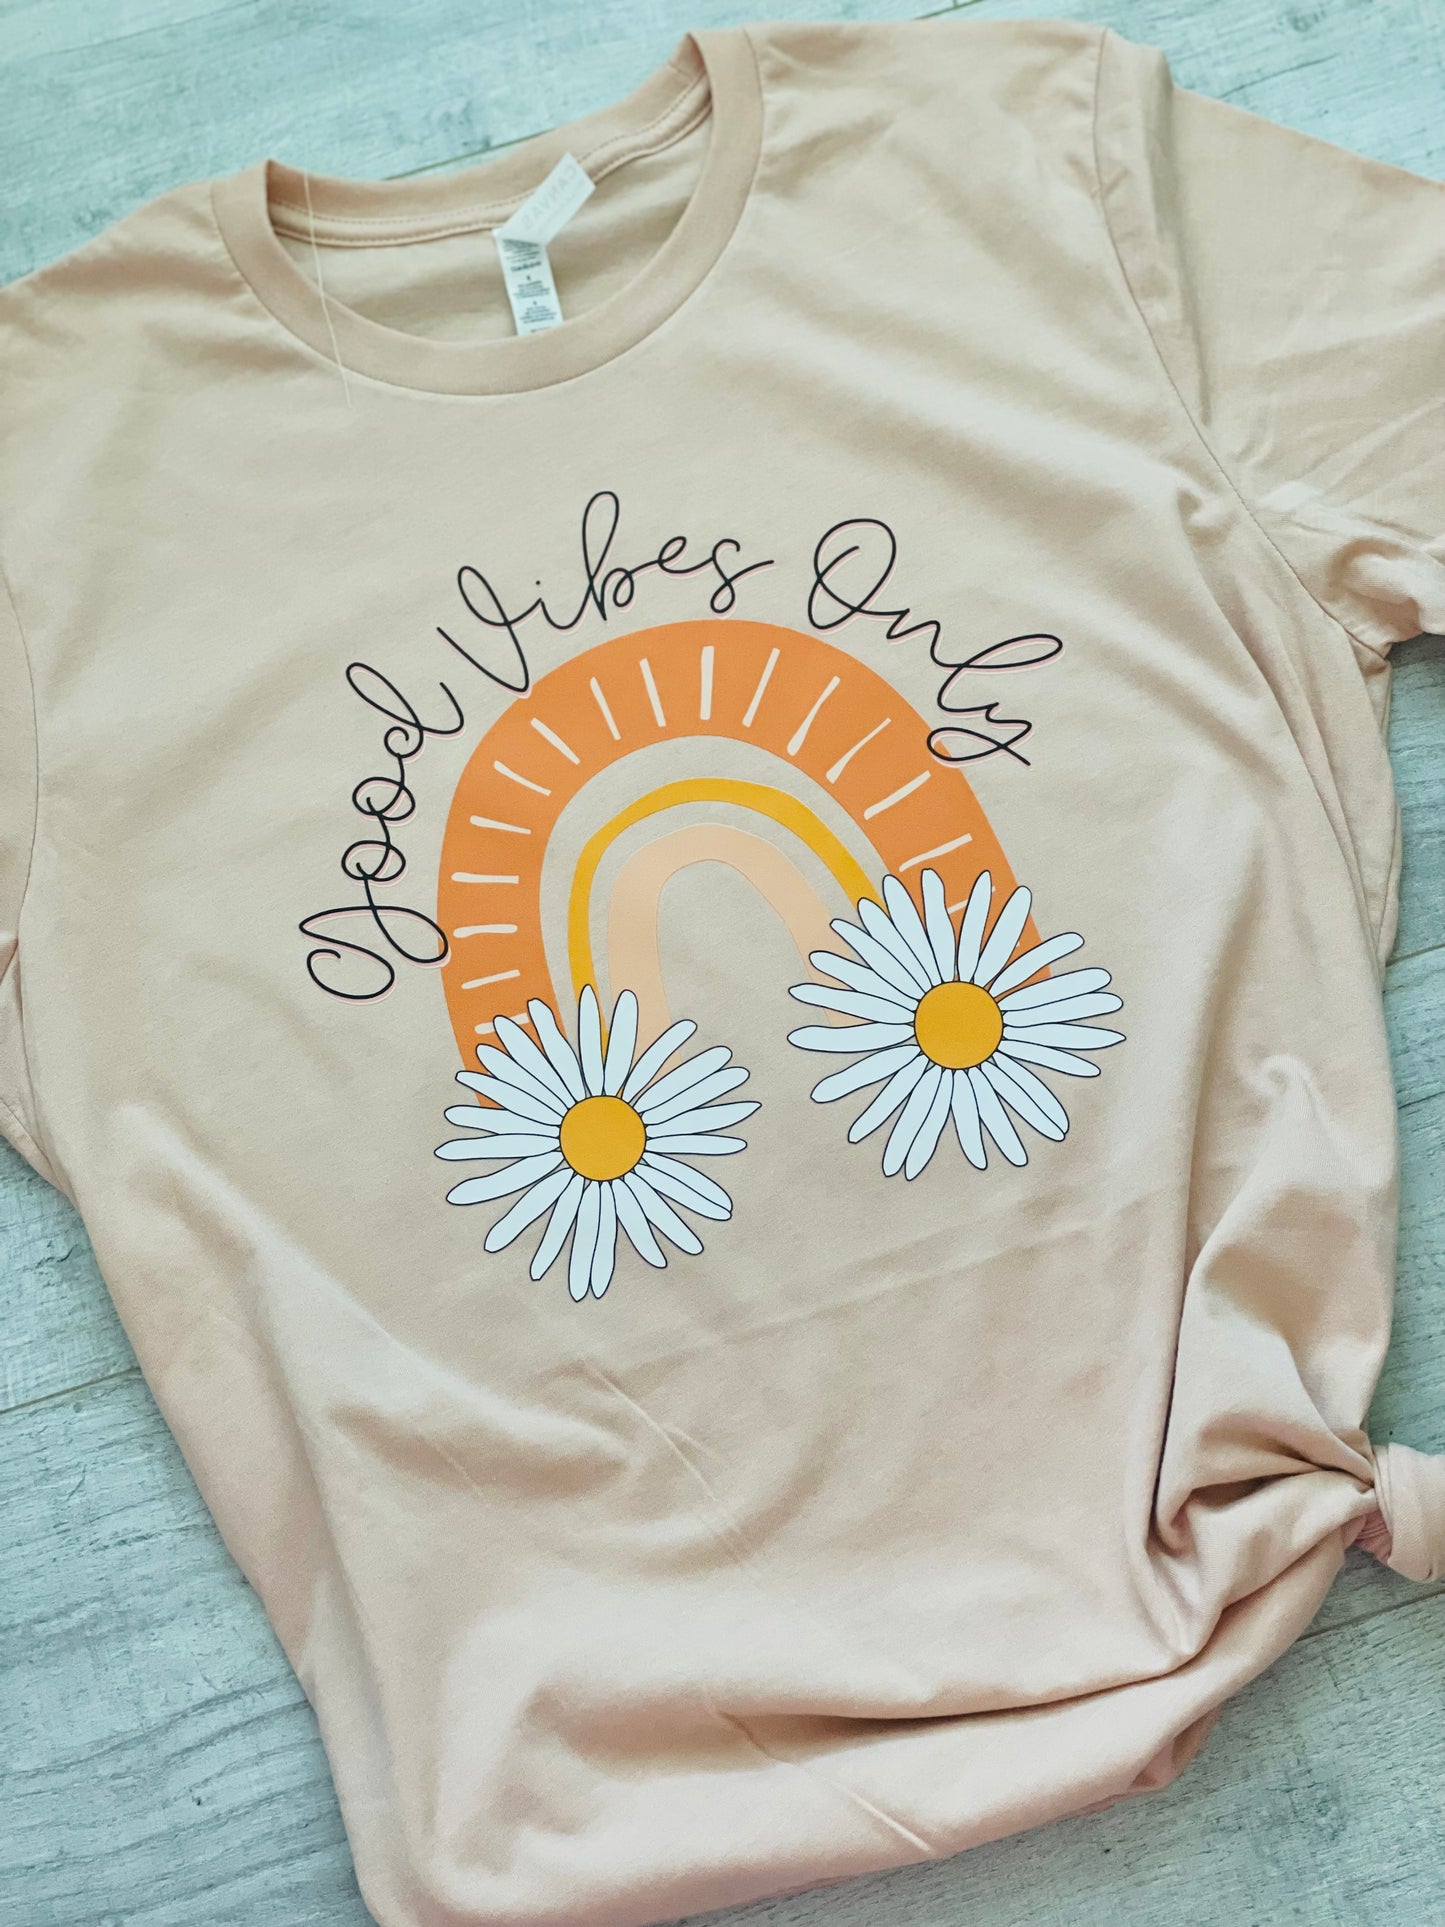 Good Vibes Only Tee Shirt